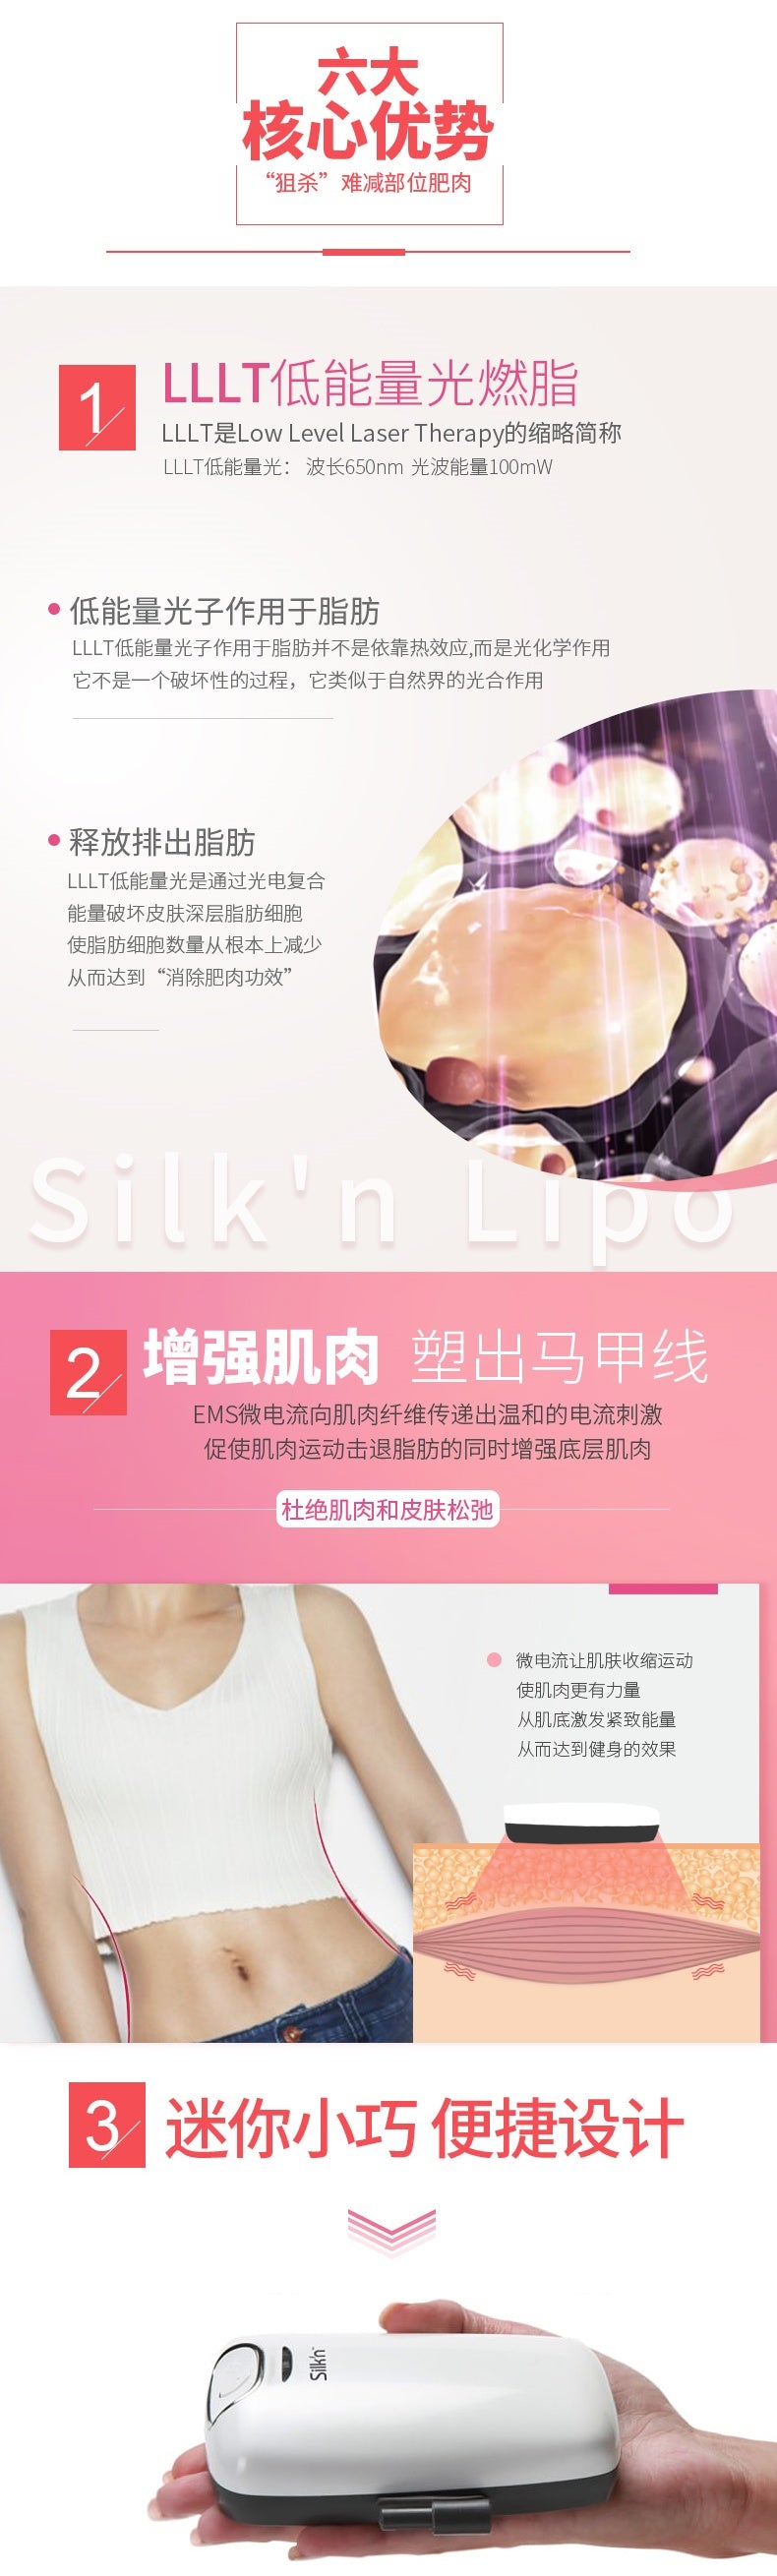 6 Reasons why you should use Silk'n Lipo, the cellulite removal machine and fat reduction device makes use of LLLT and EMS to burn stubborn fat without cosmetic surgery, provide anti cellulite massage. - Silk'n Lipo Fat Reduction Device - Beautyfoomall.com Malaysia